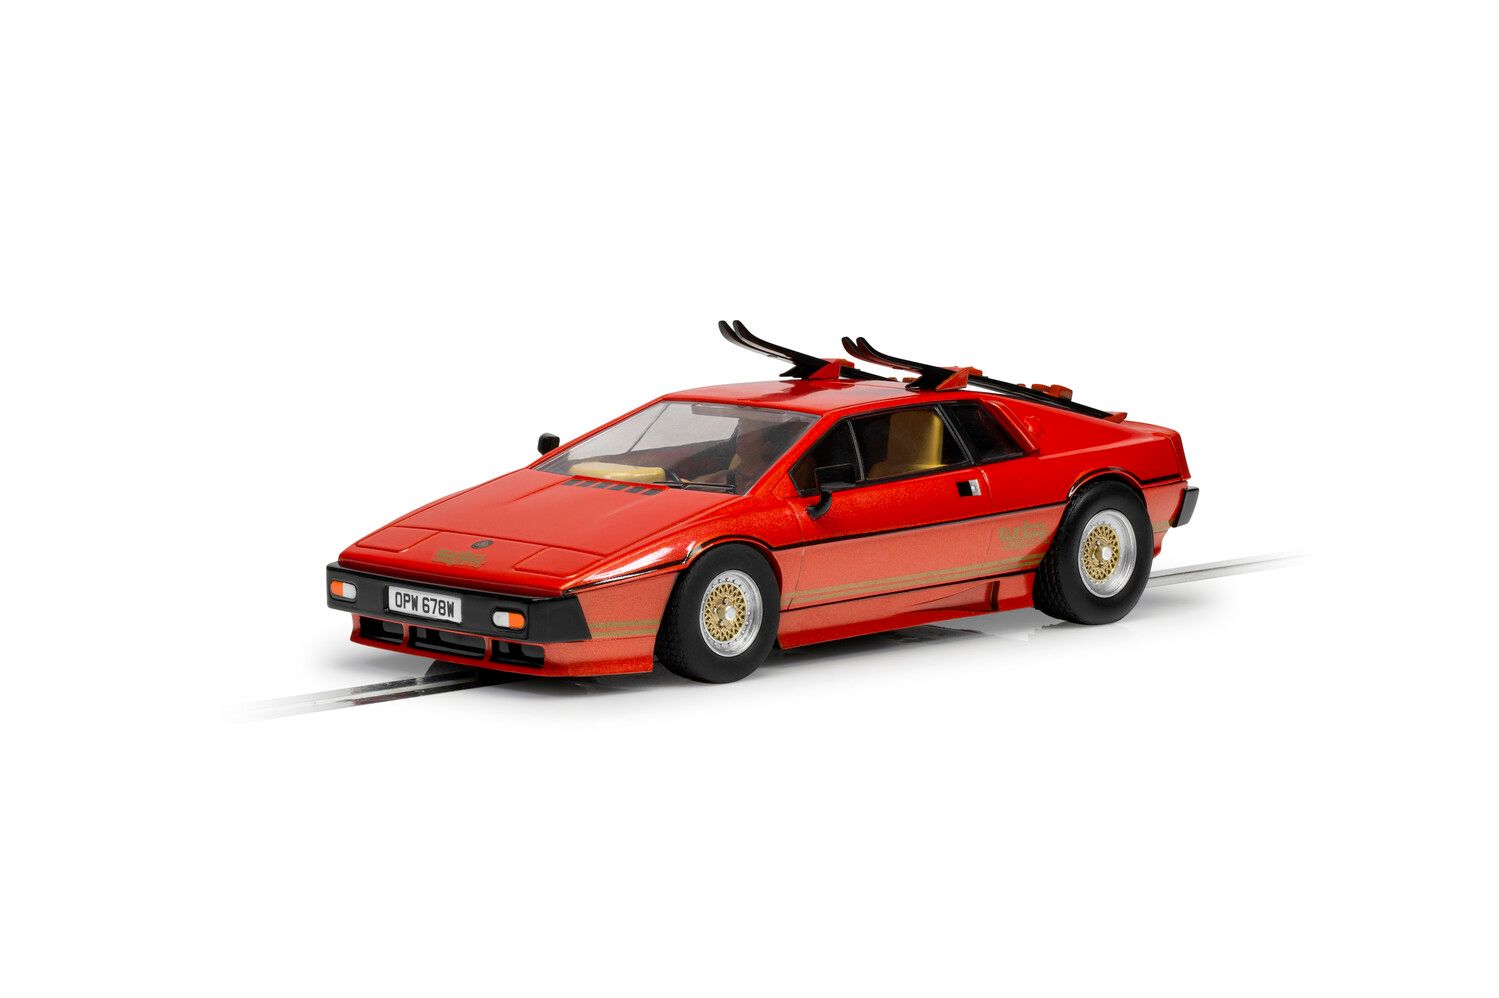 C4301 James Bond Lotus Esprit Turbo "For Your Eyes Only"